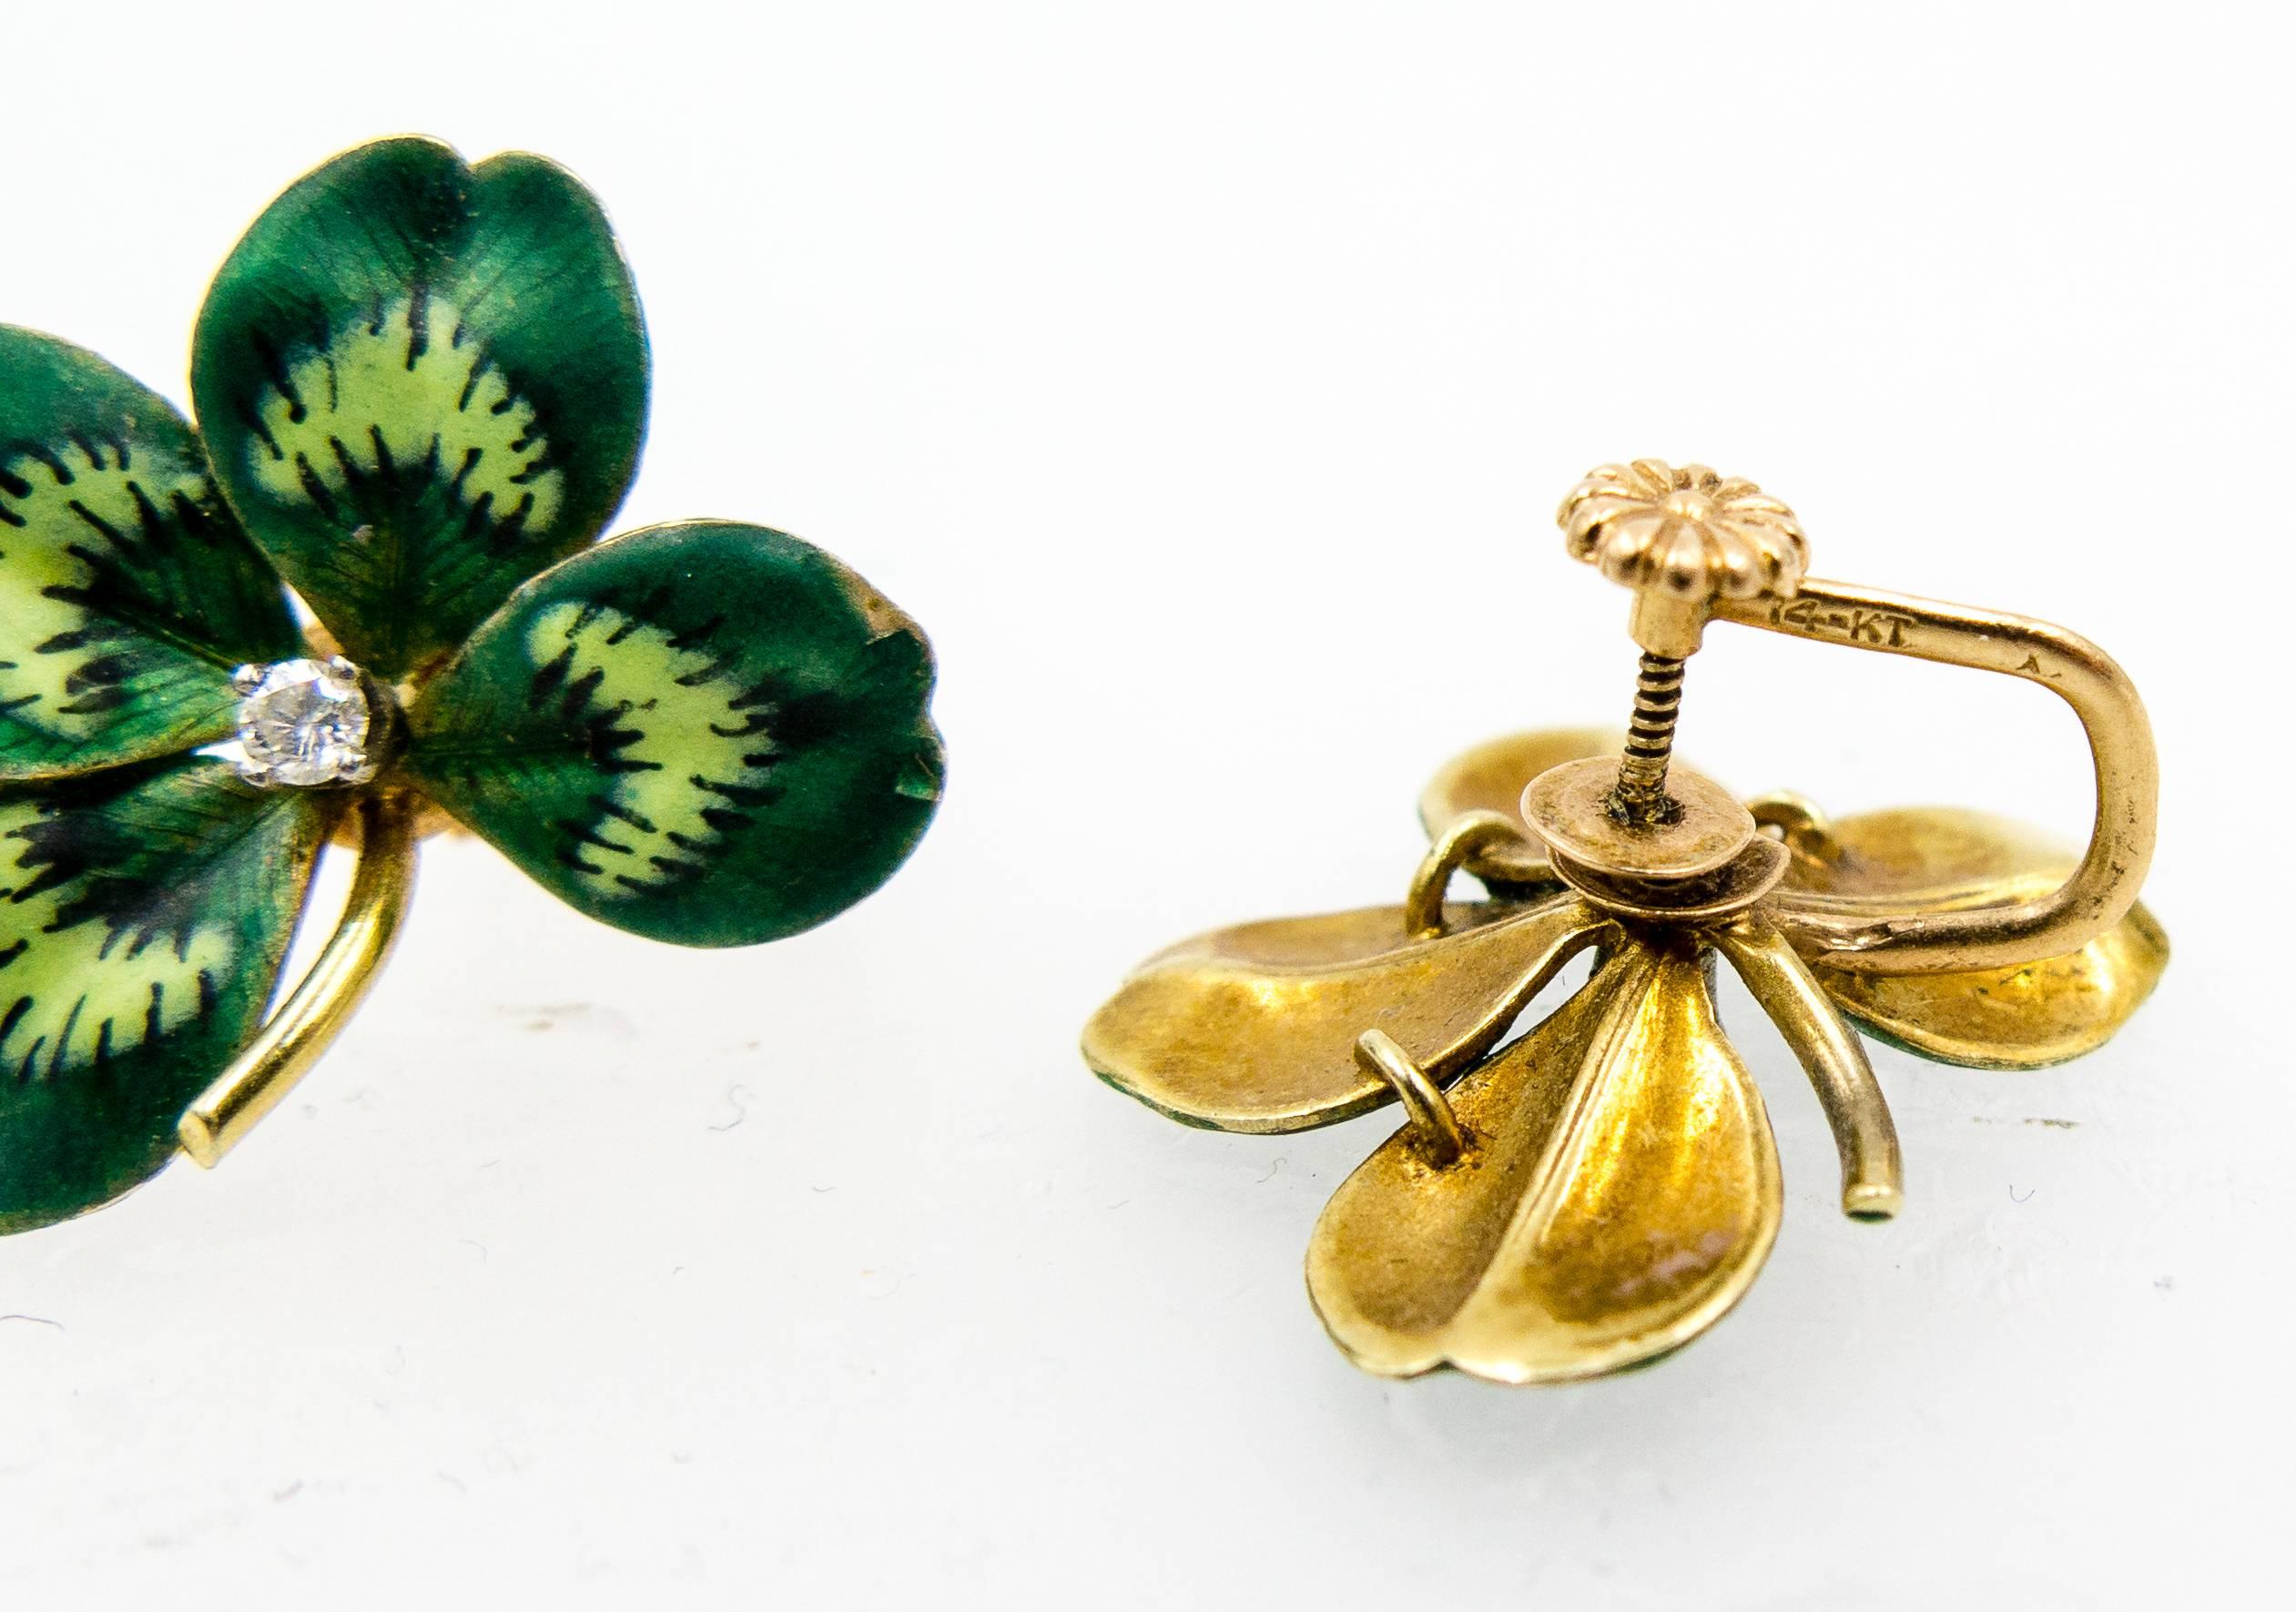 Delightful little suite consisting of a pin/pendant and a pair of non-pierced screwback earrings.   The pin can be worn upside down as a pendant when hung from the swirled gold tube at the rear, and each four leaf clover motif is centered by a